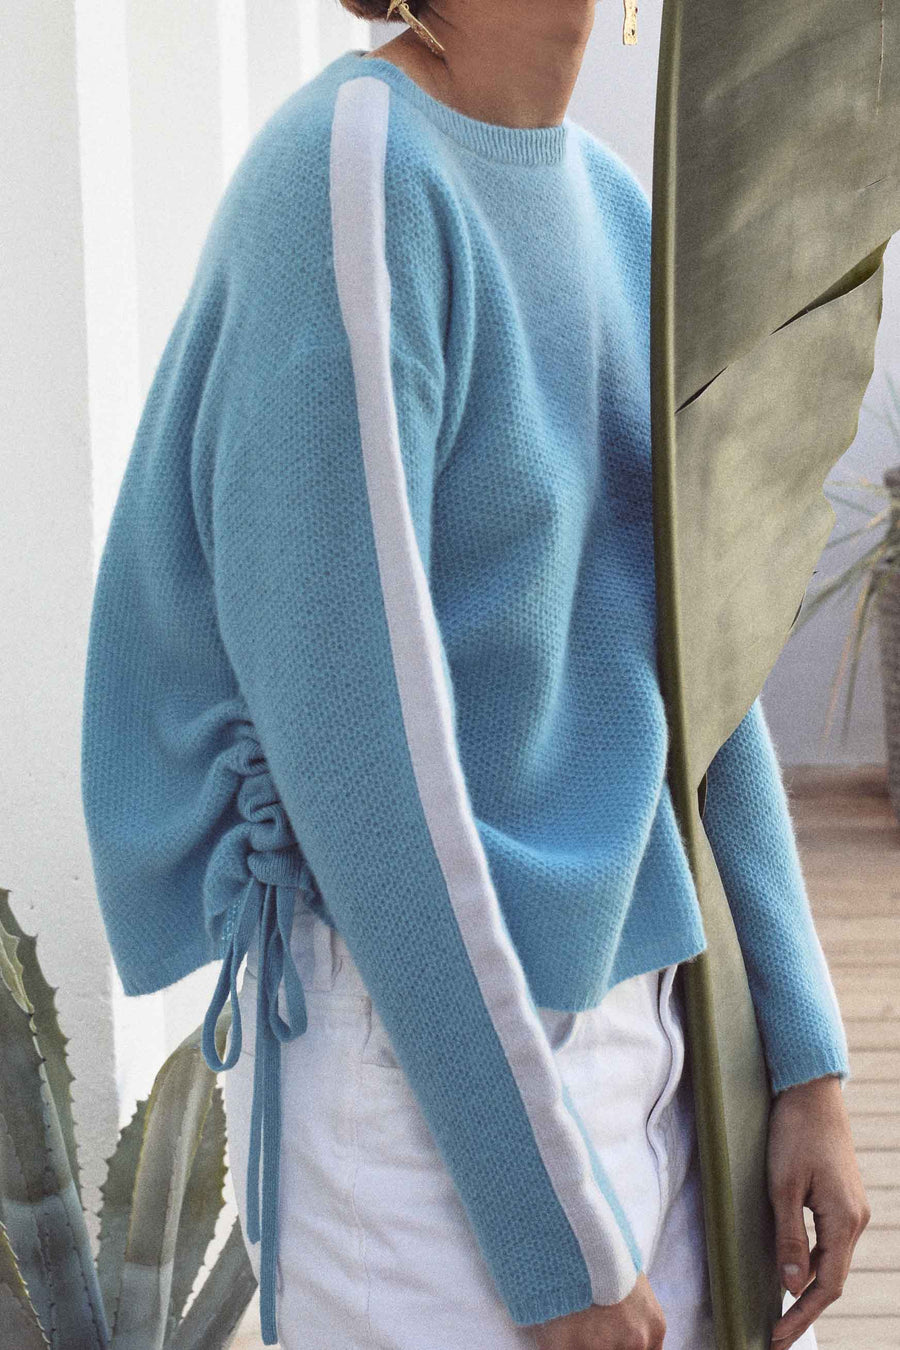 Buzz cashmere sweater in Heron / Ghost